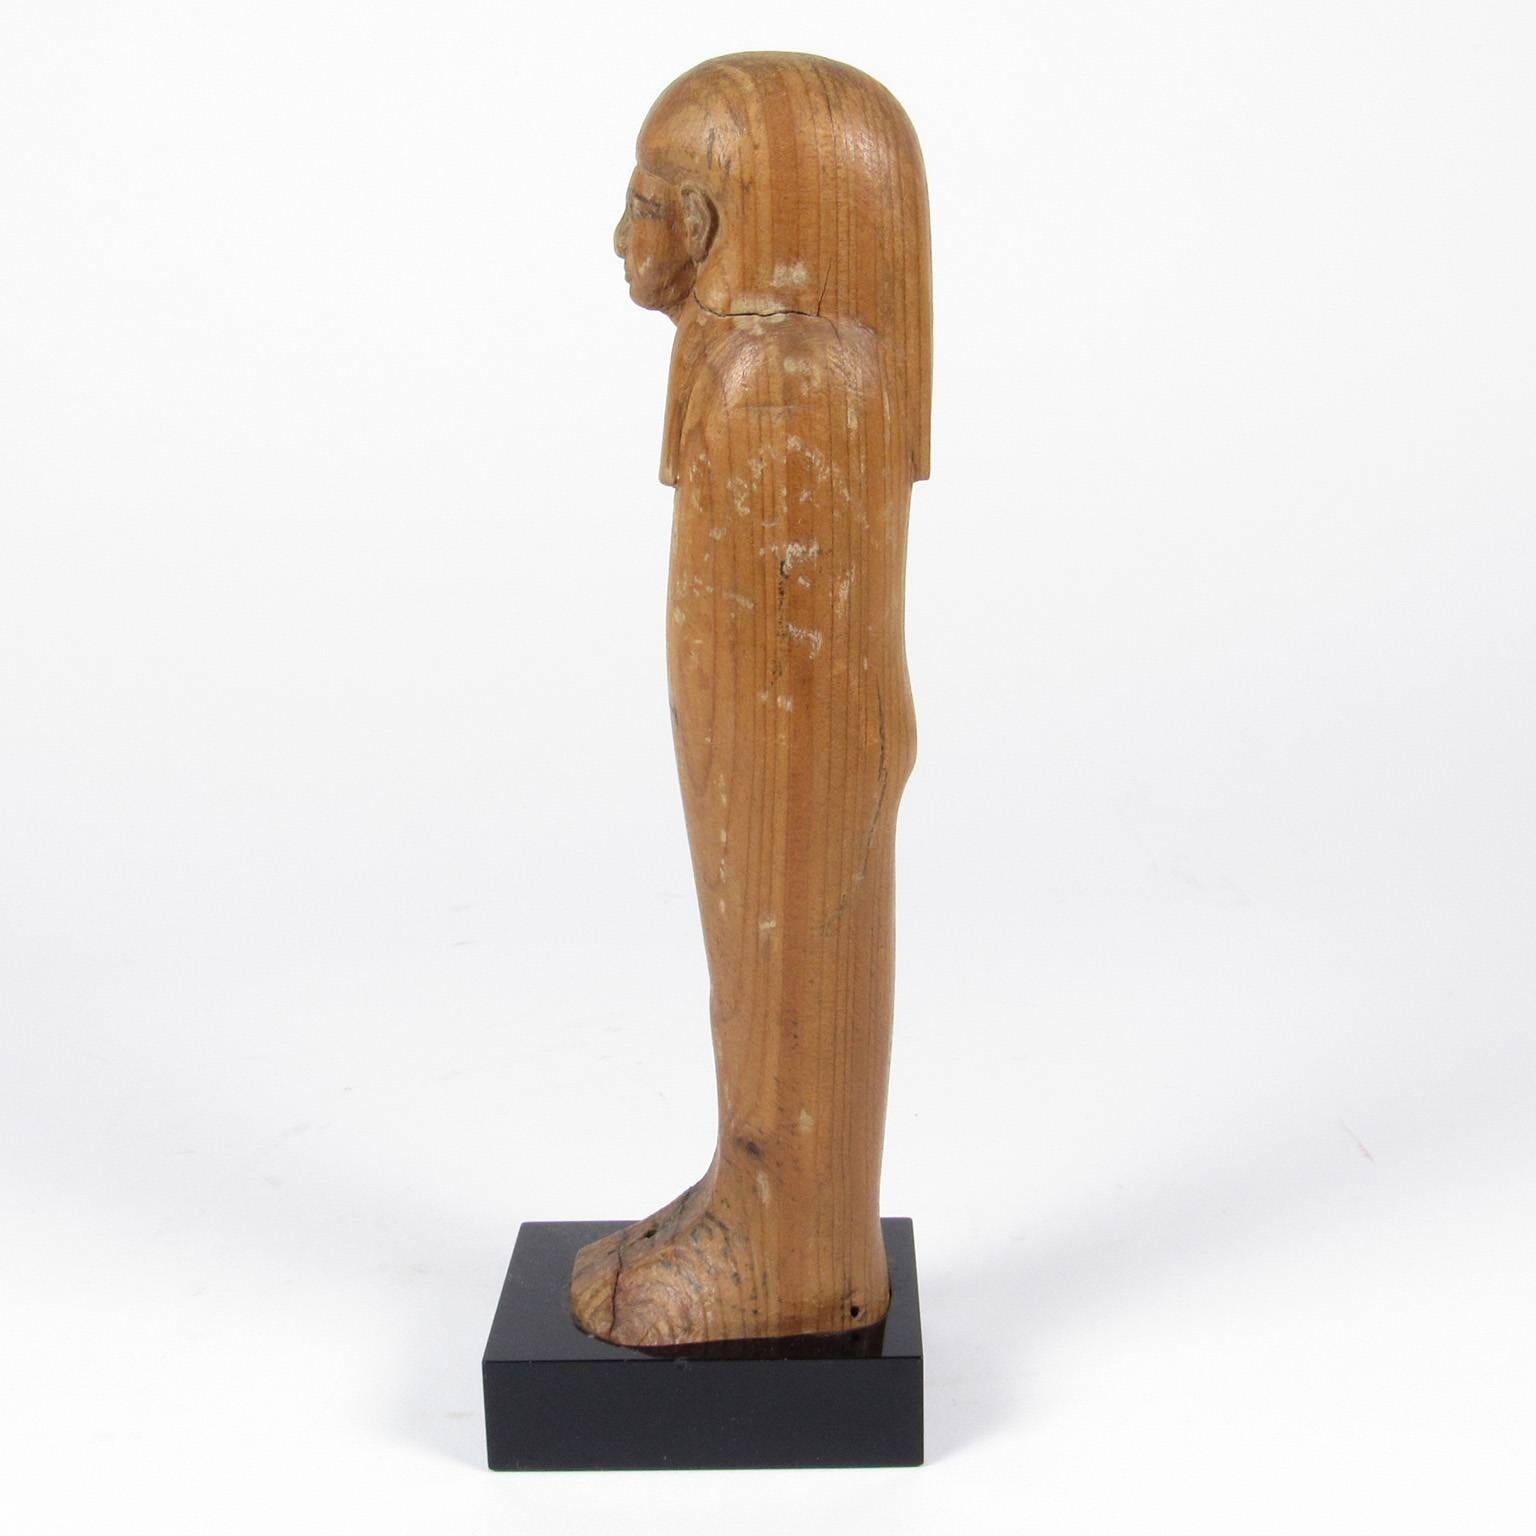 Hand-Carved Ancient Egyptian Carved Wood Ushabti Figure